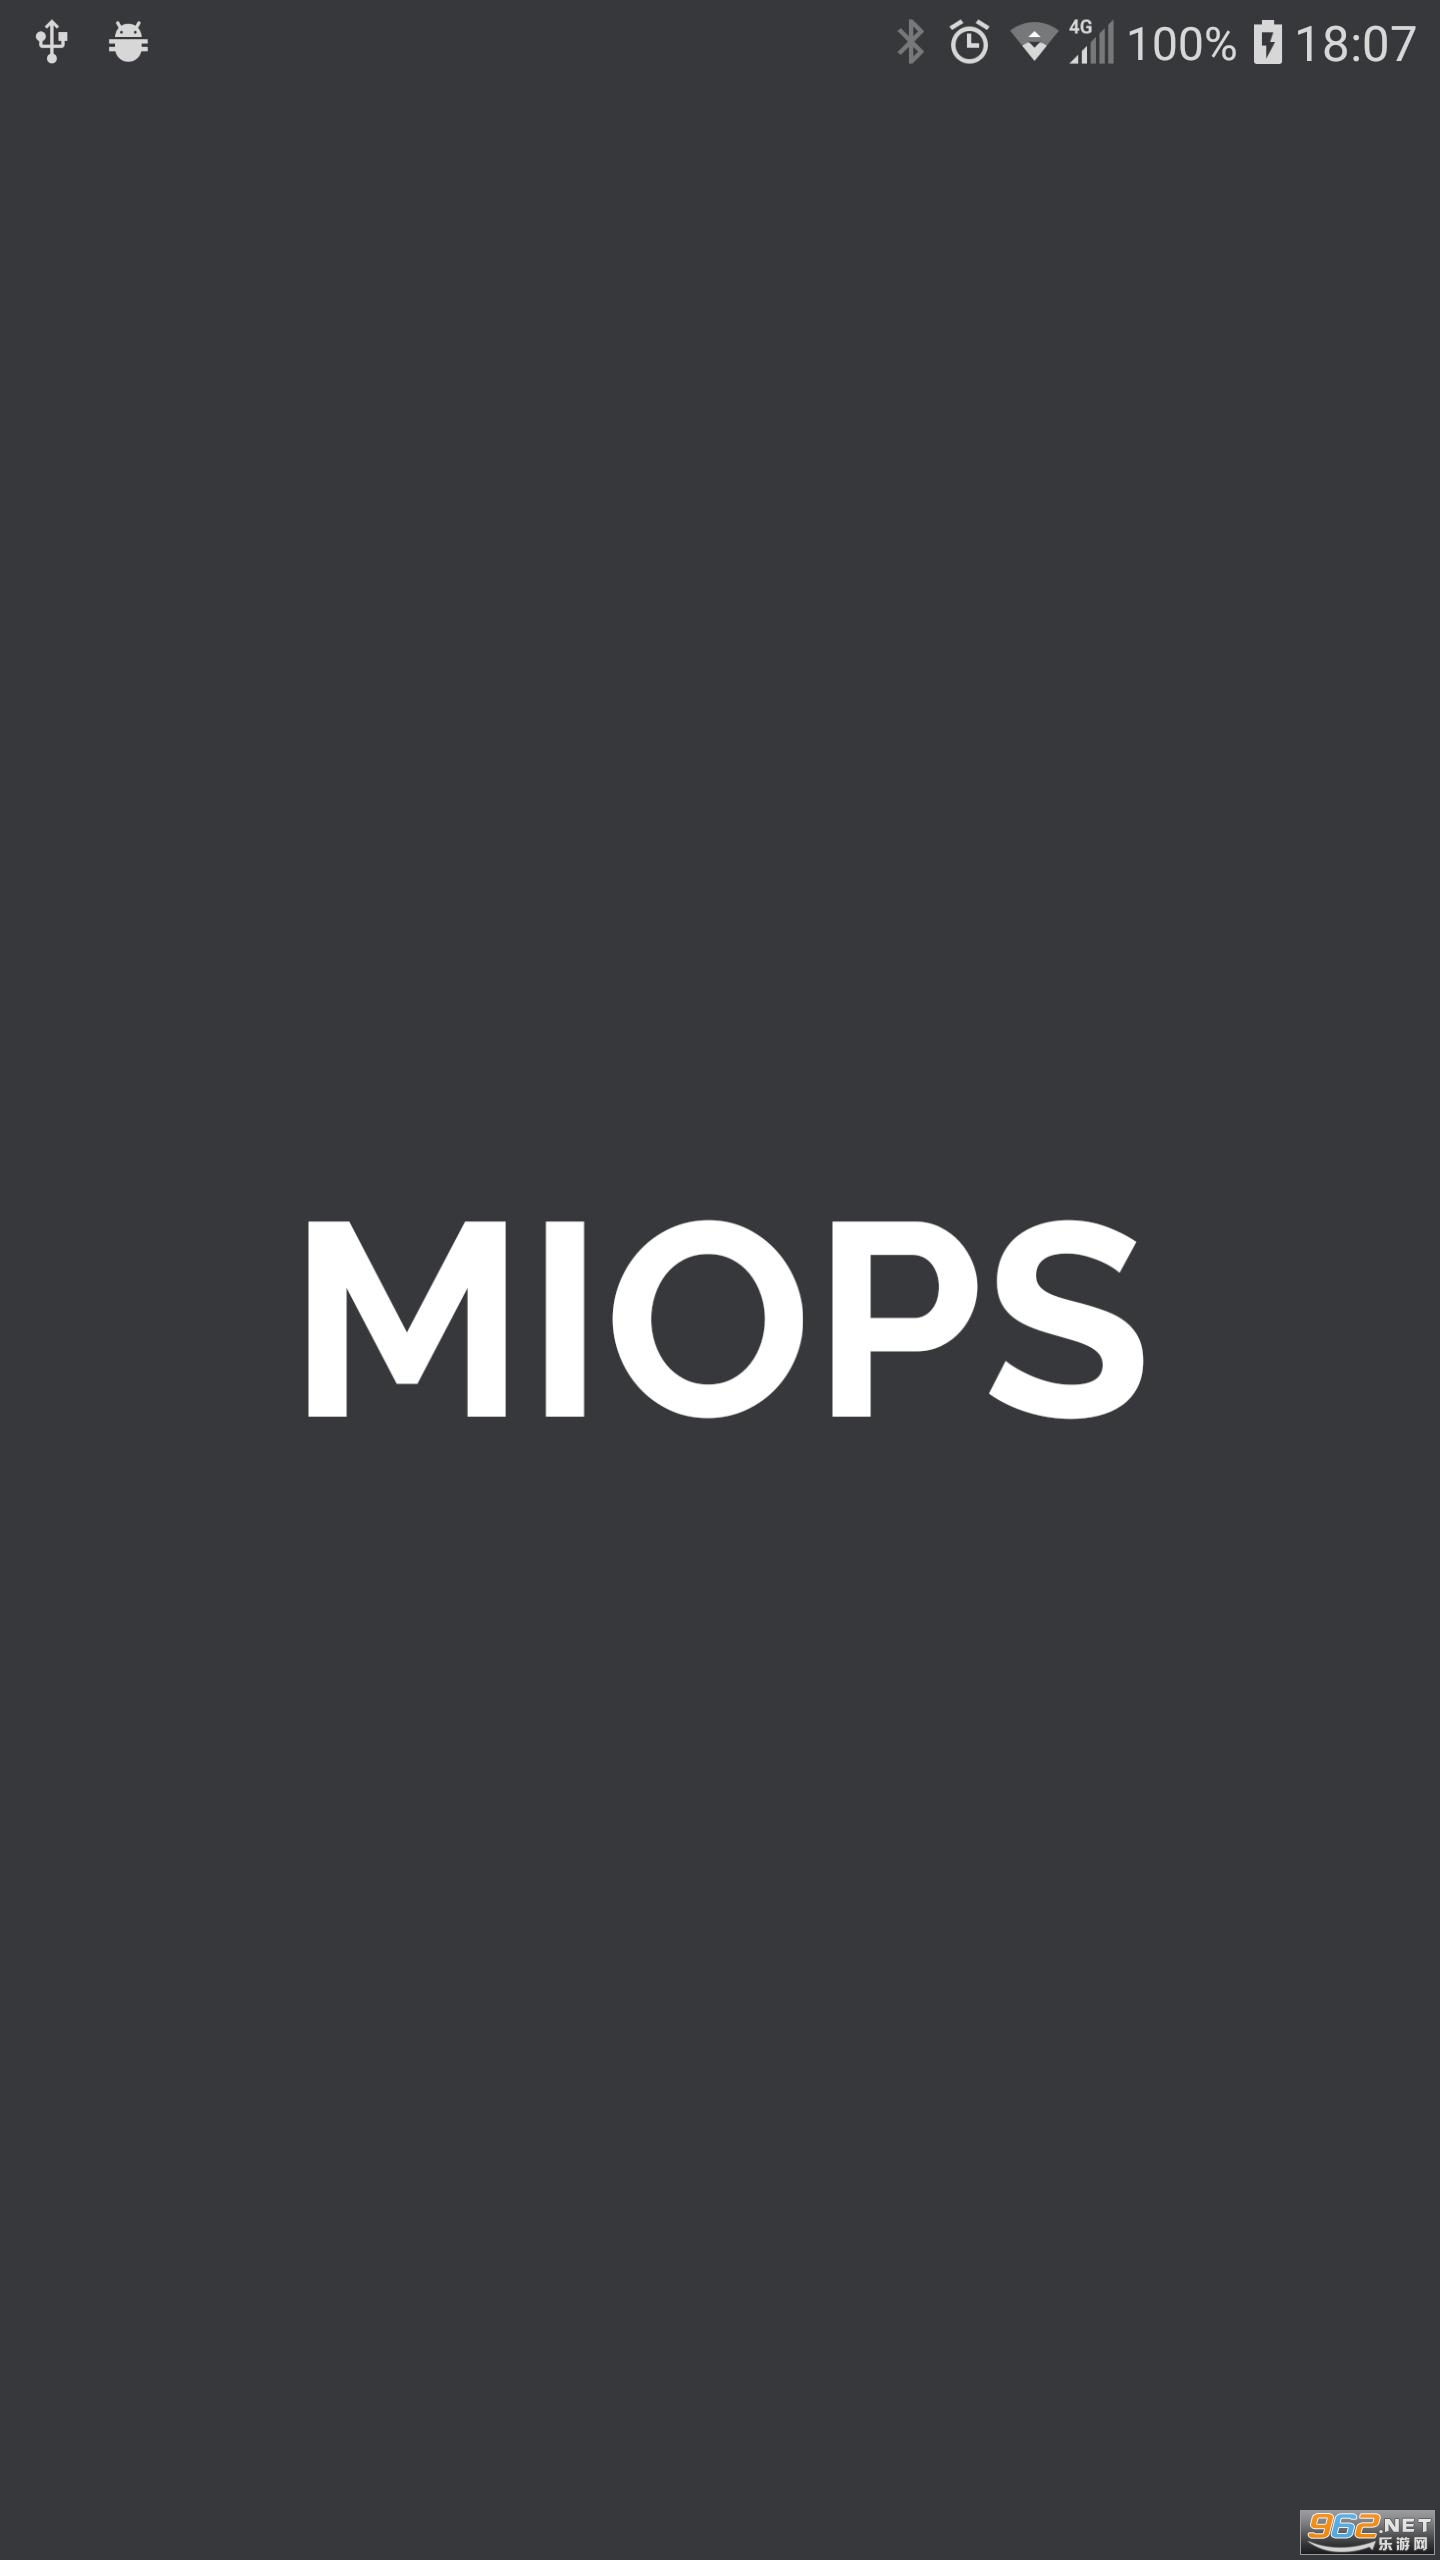 MIOPS MOBILE